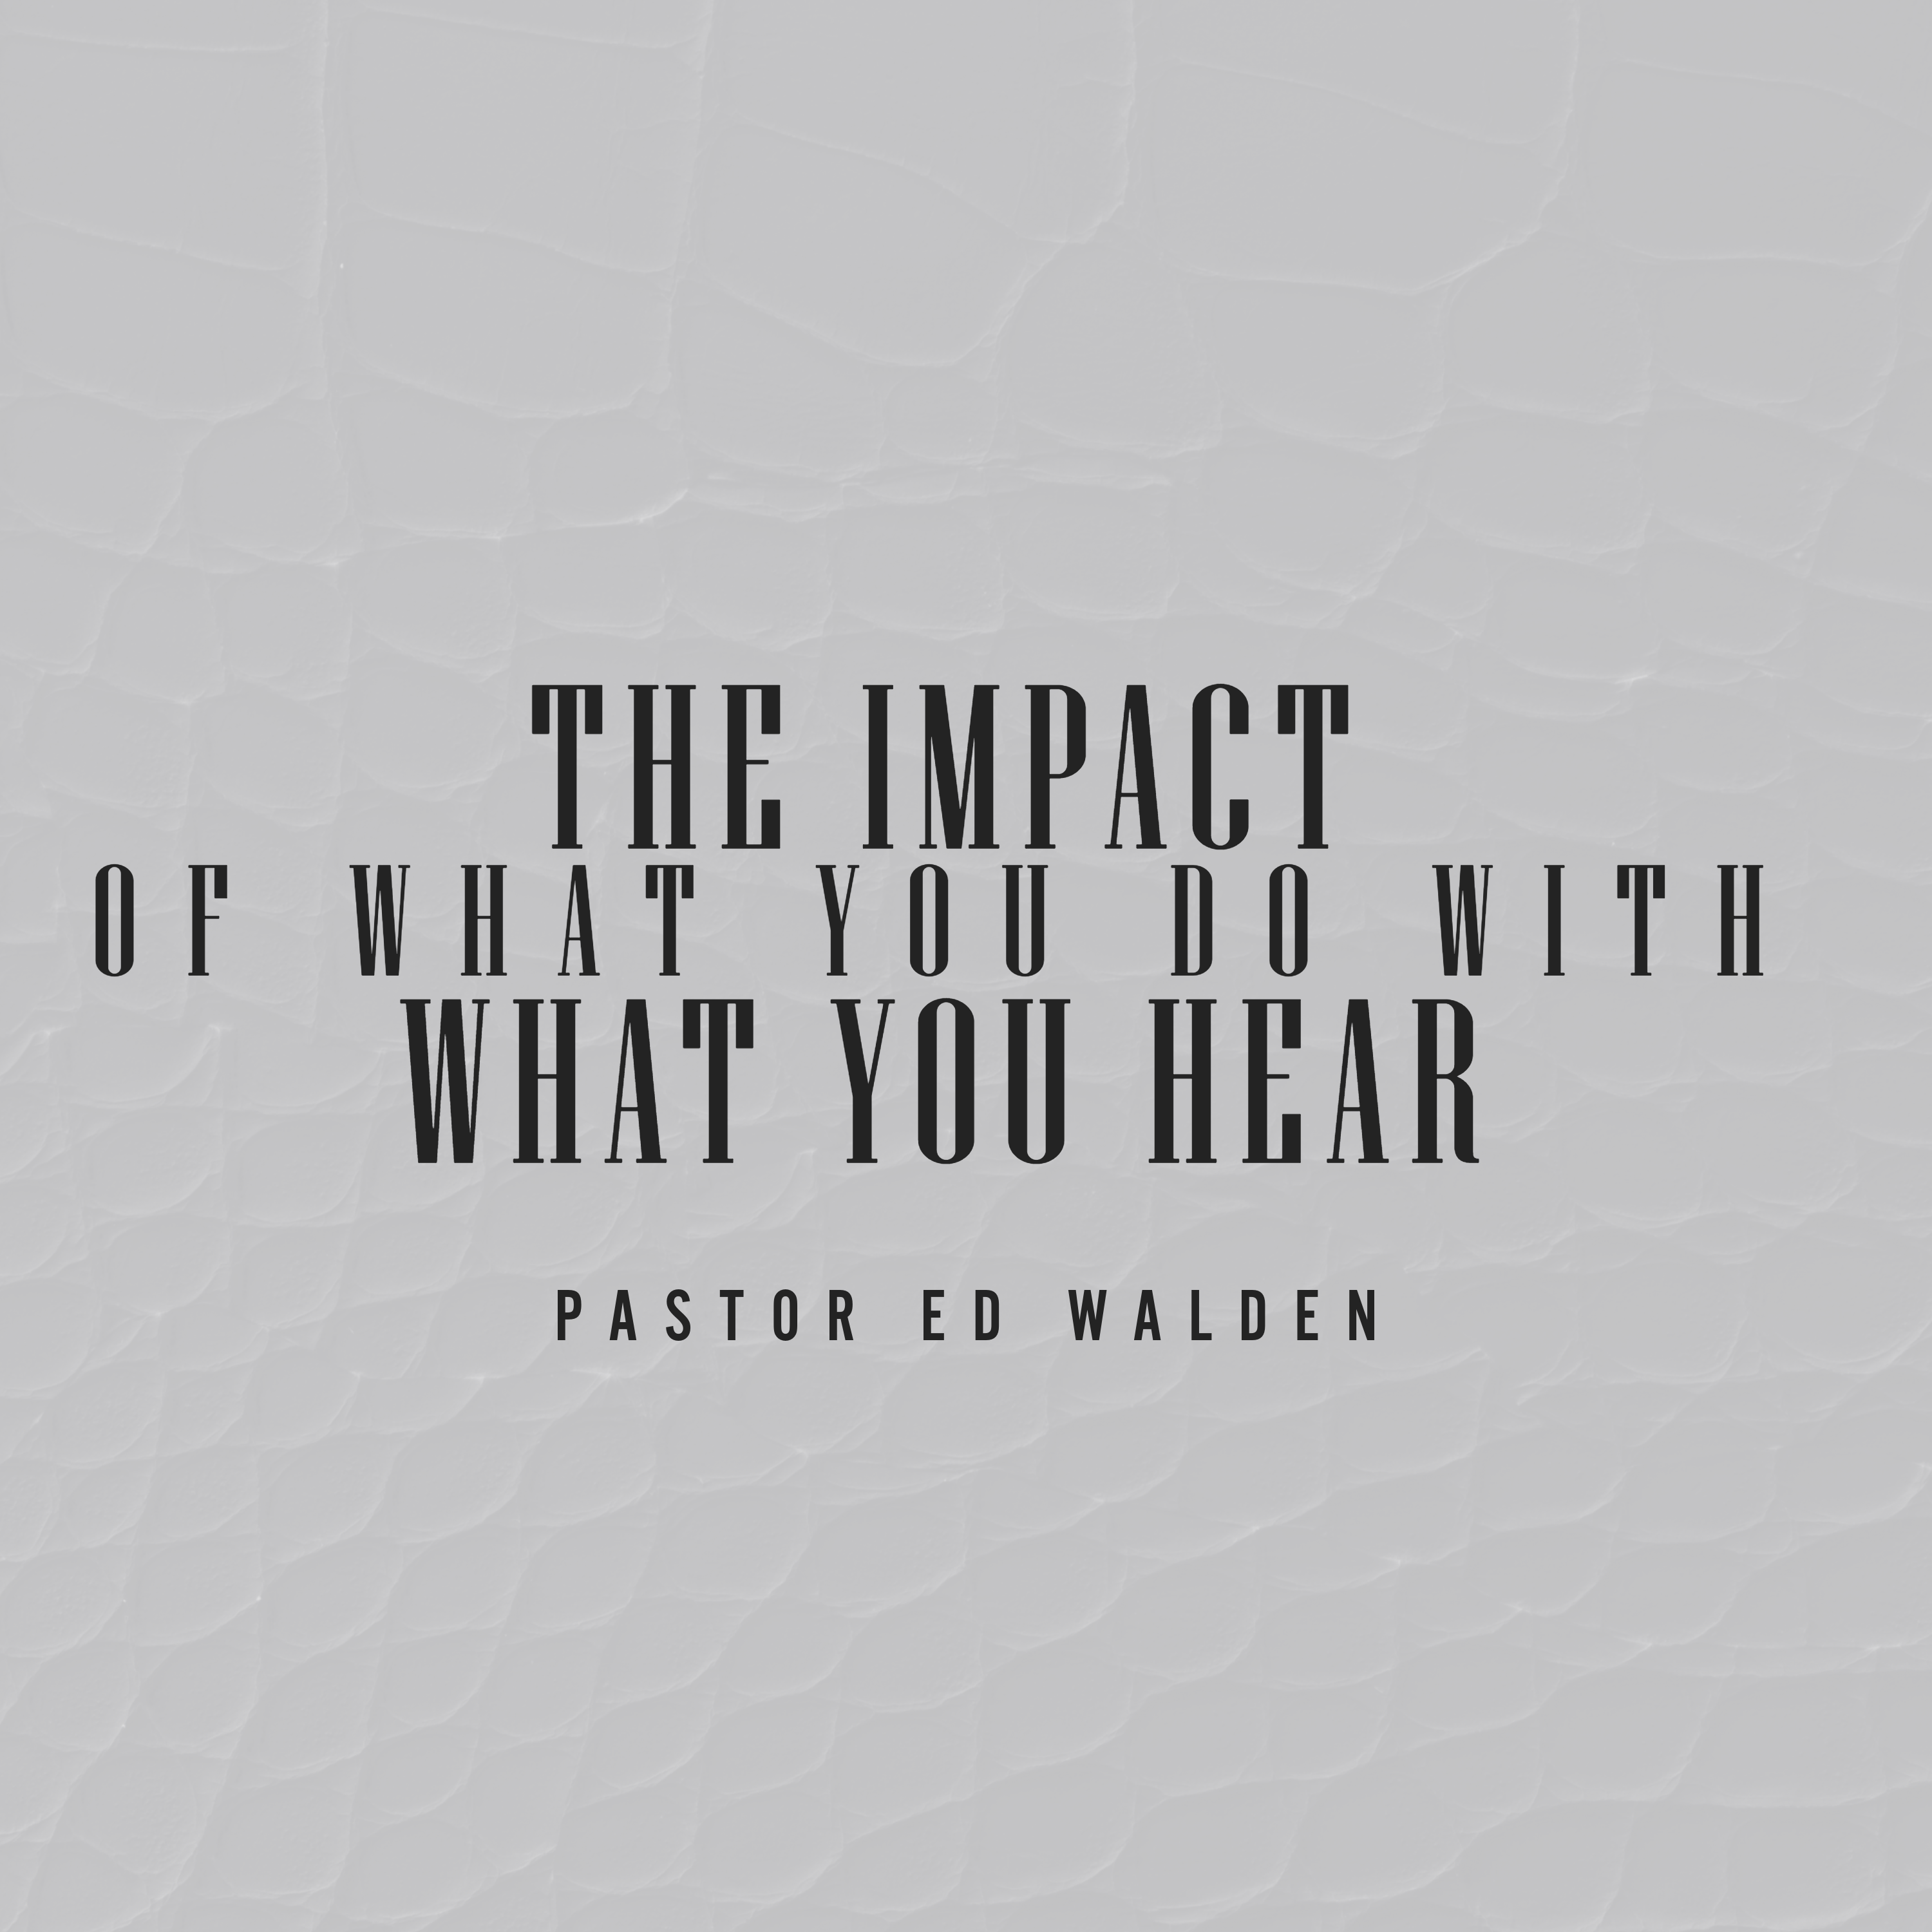 The Impact Of What You Do With What You Hear